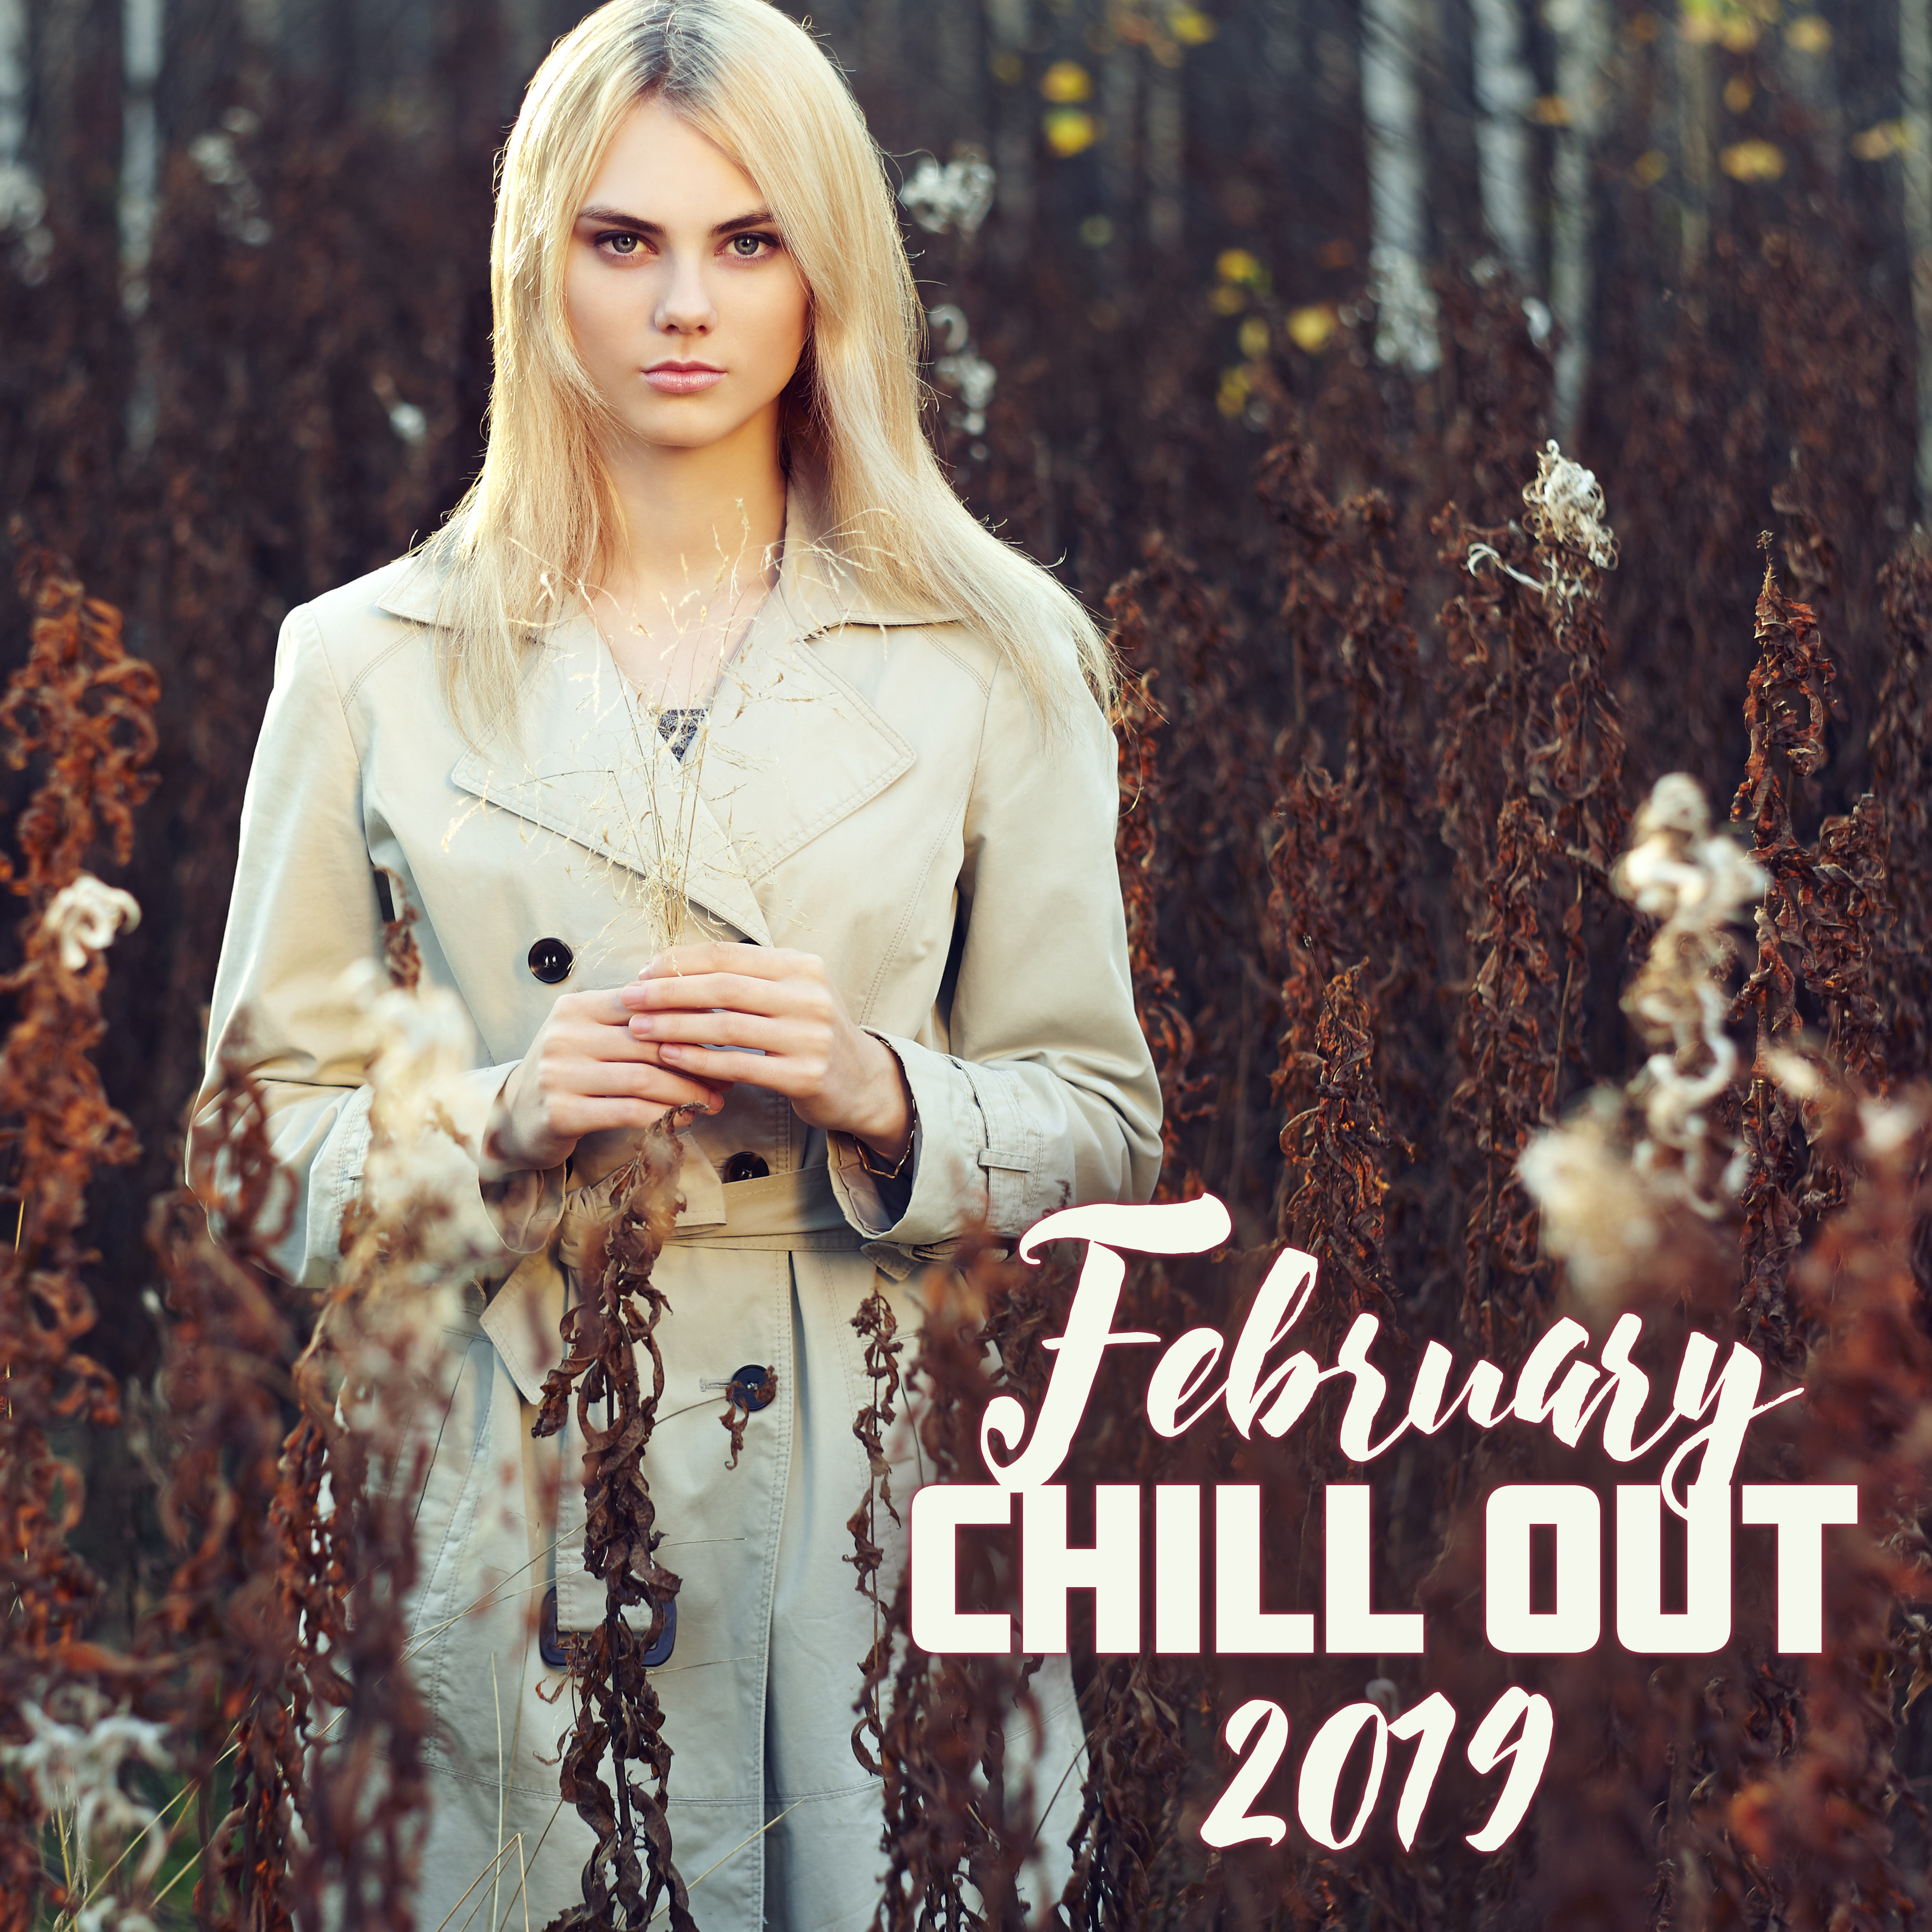 February Chill Out 2019 - Winter Lounge Coffee, Calming Beats for Relaxation, Sleep, Meditation, Winter Chillout 2019, Perfect Relax